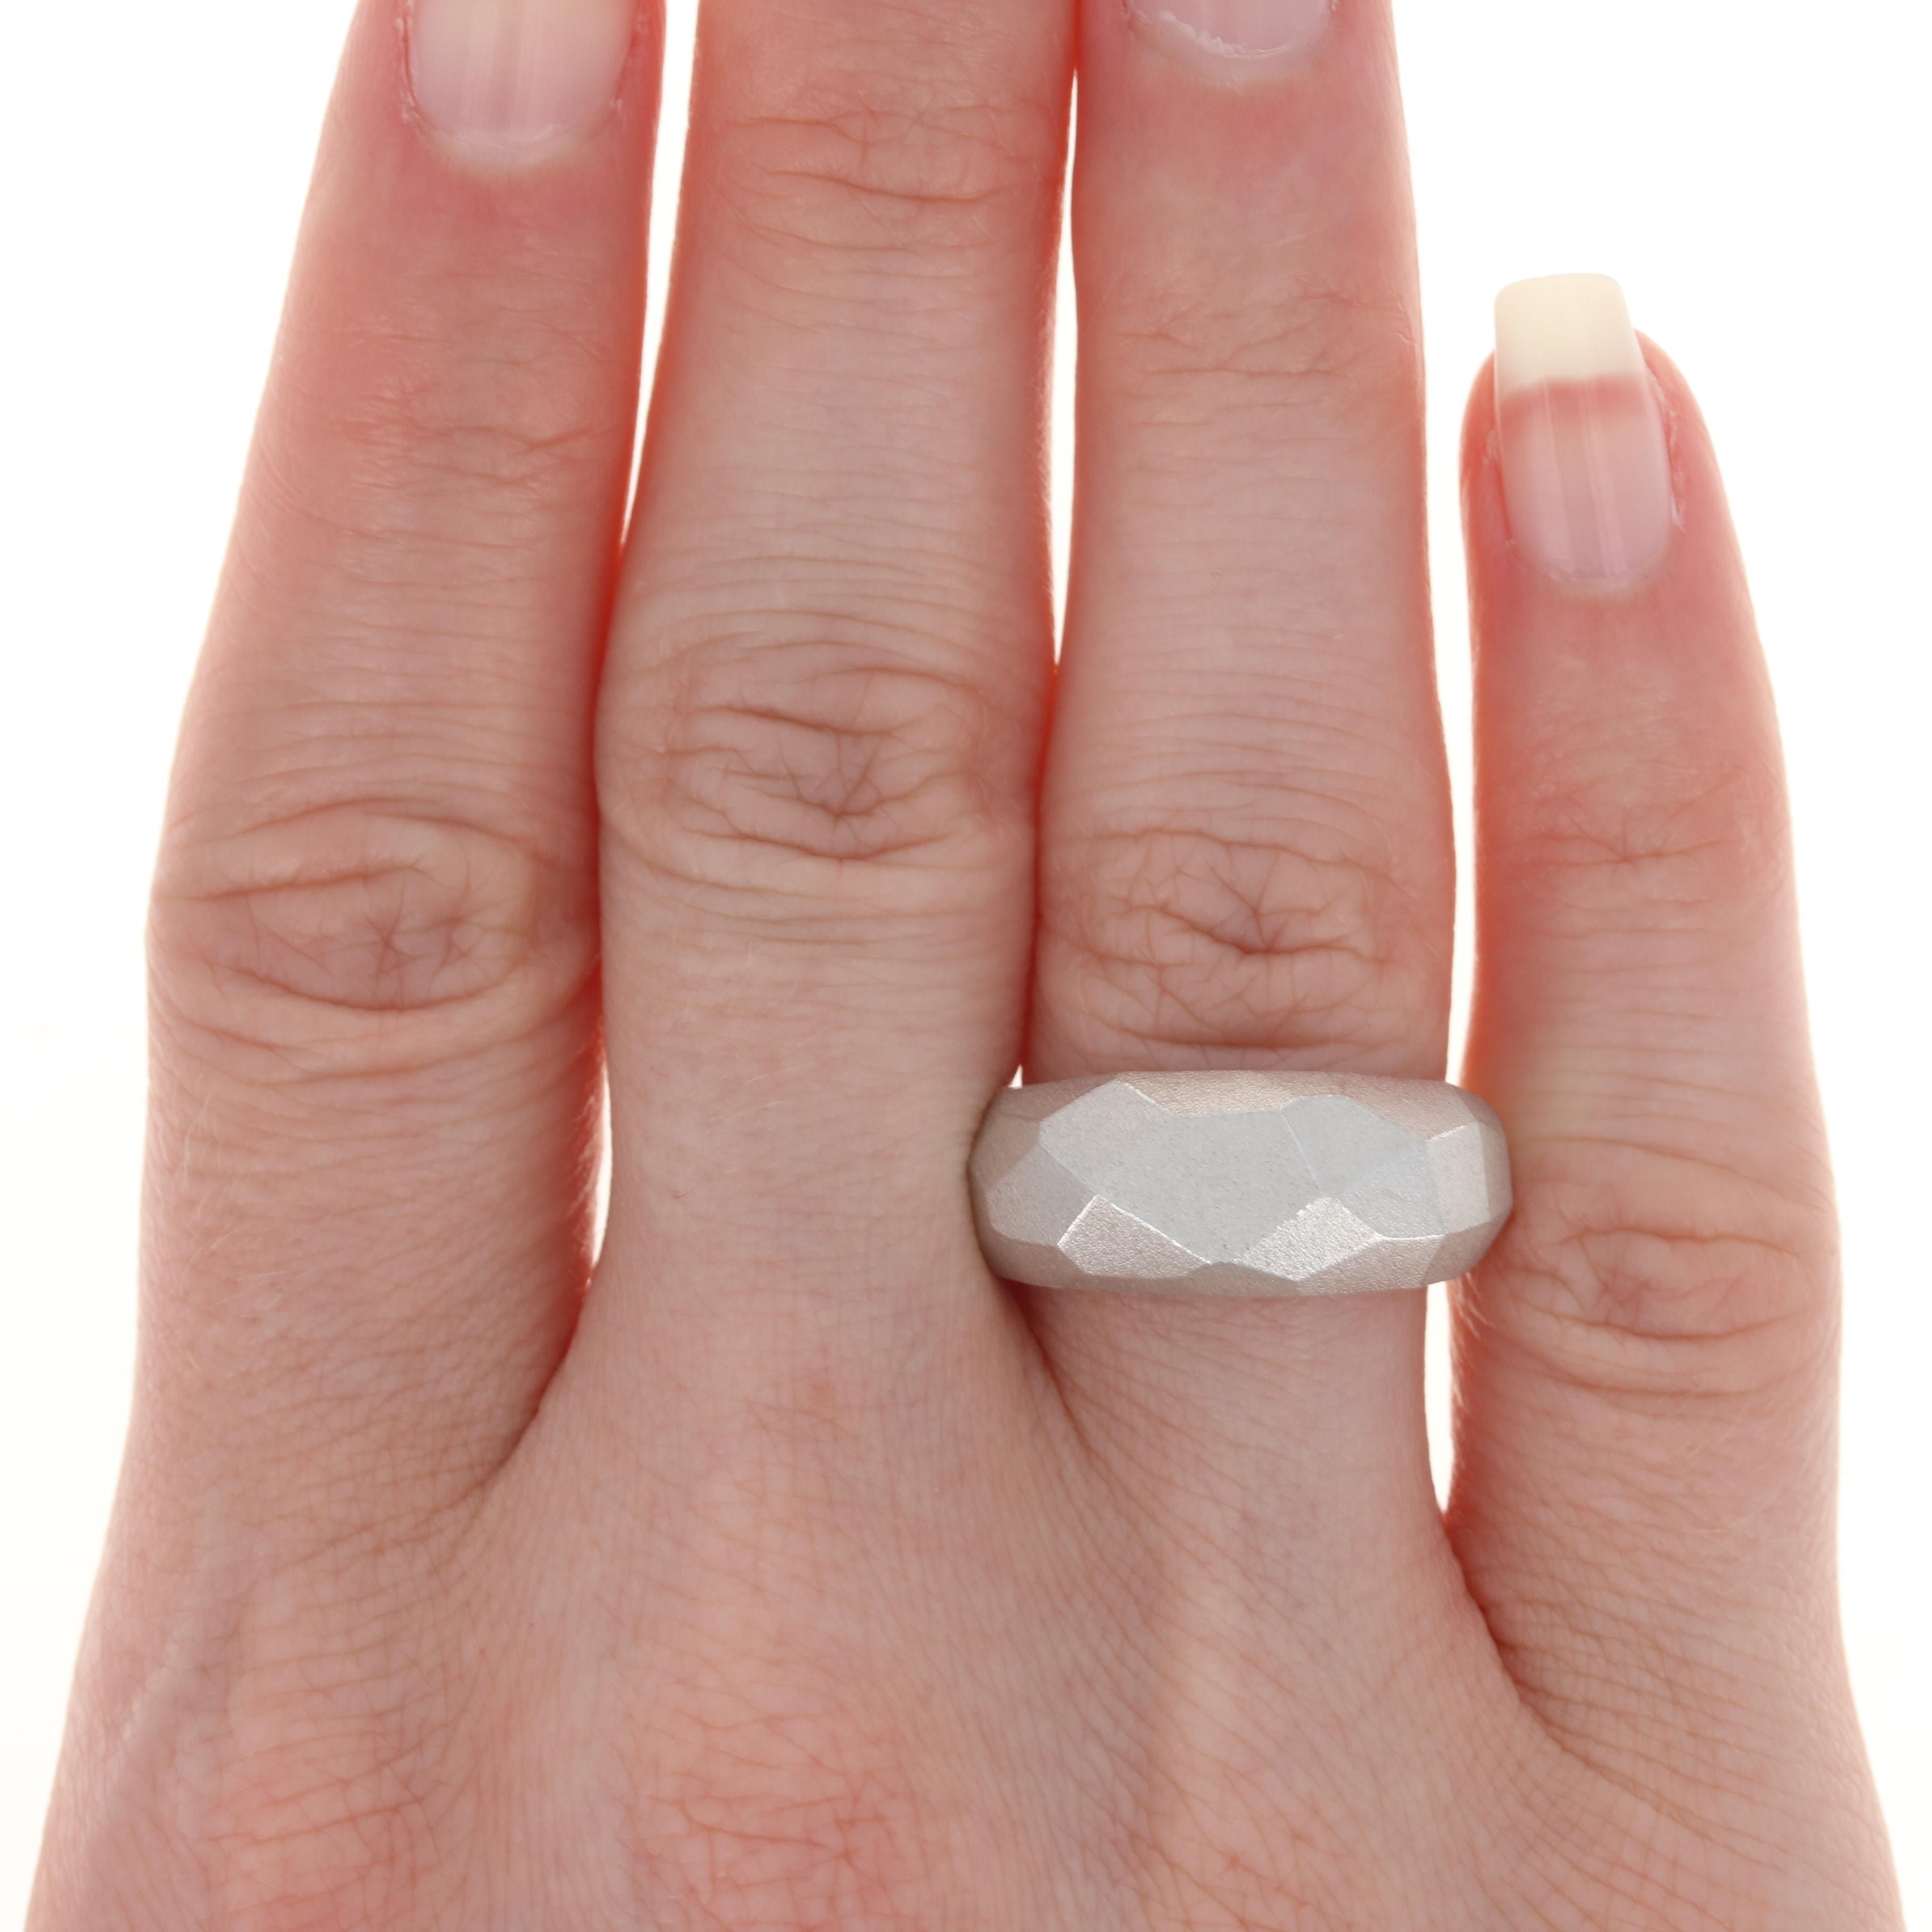 This ring retails at $200
This ring is a size 7 3/4. Please contact for additional sizing options.
Metal Content: Sterling Silver
Finish: Brushed
Face Height (north to south): 3/8